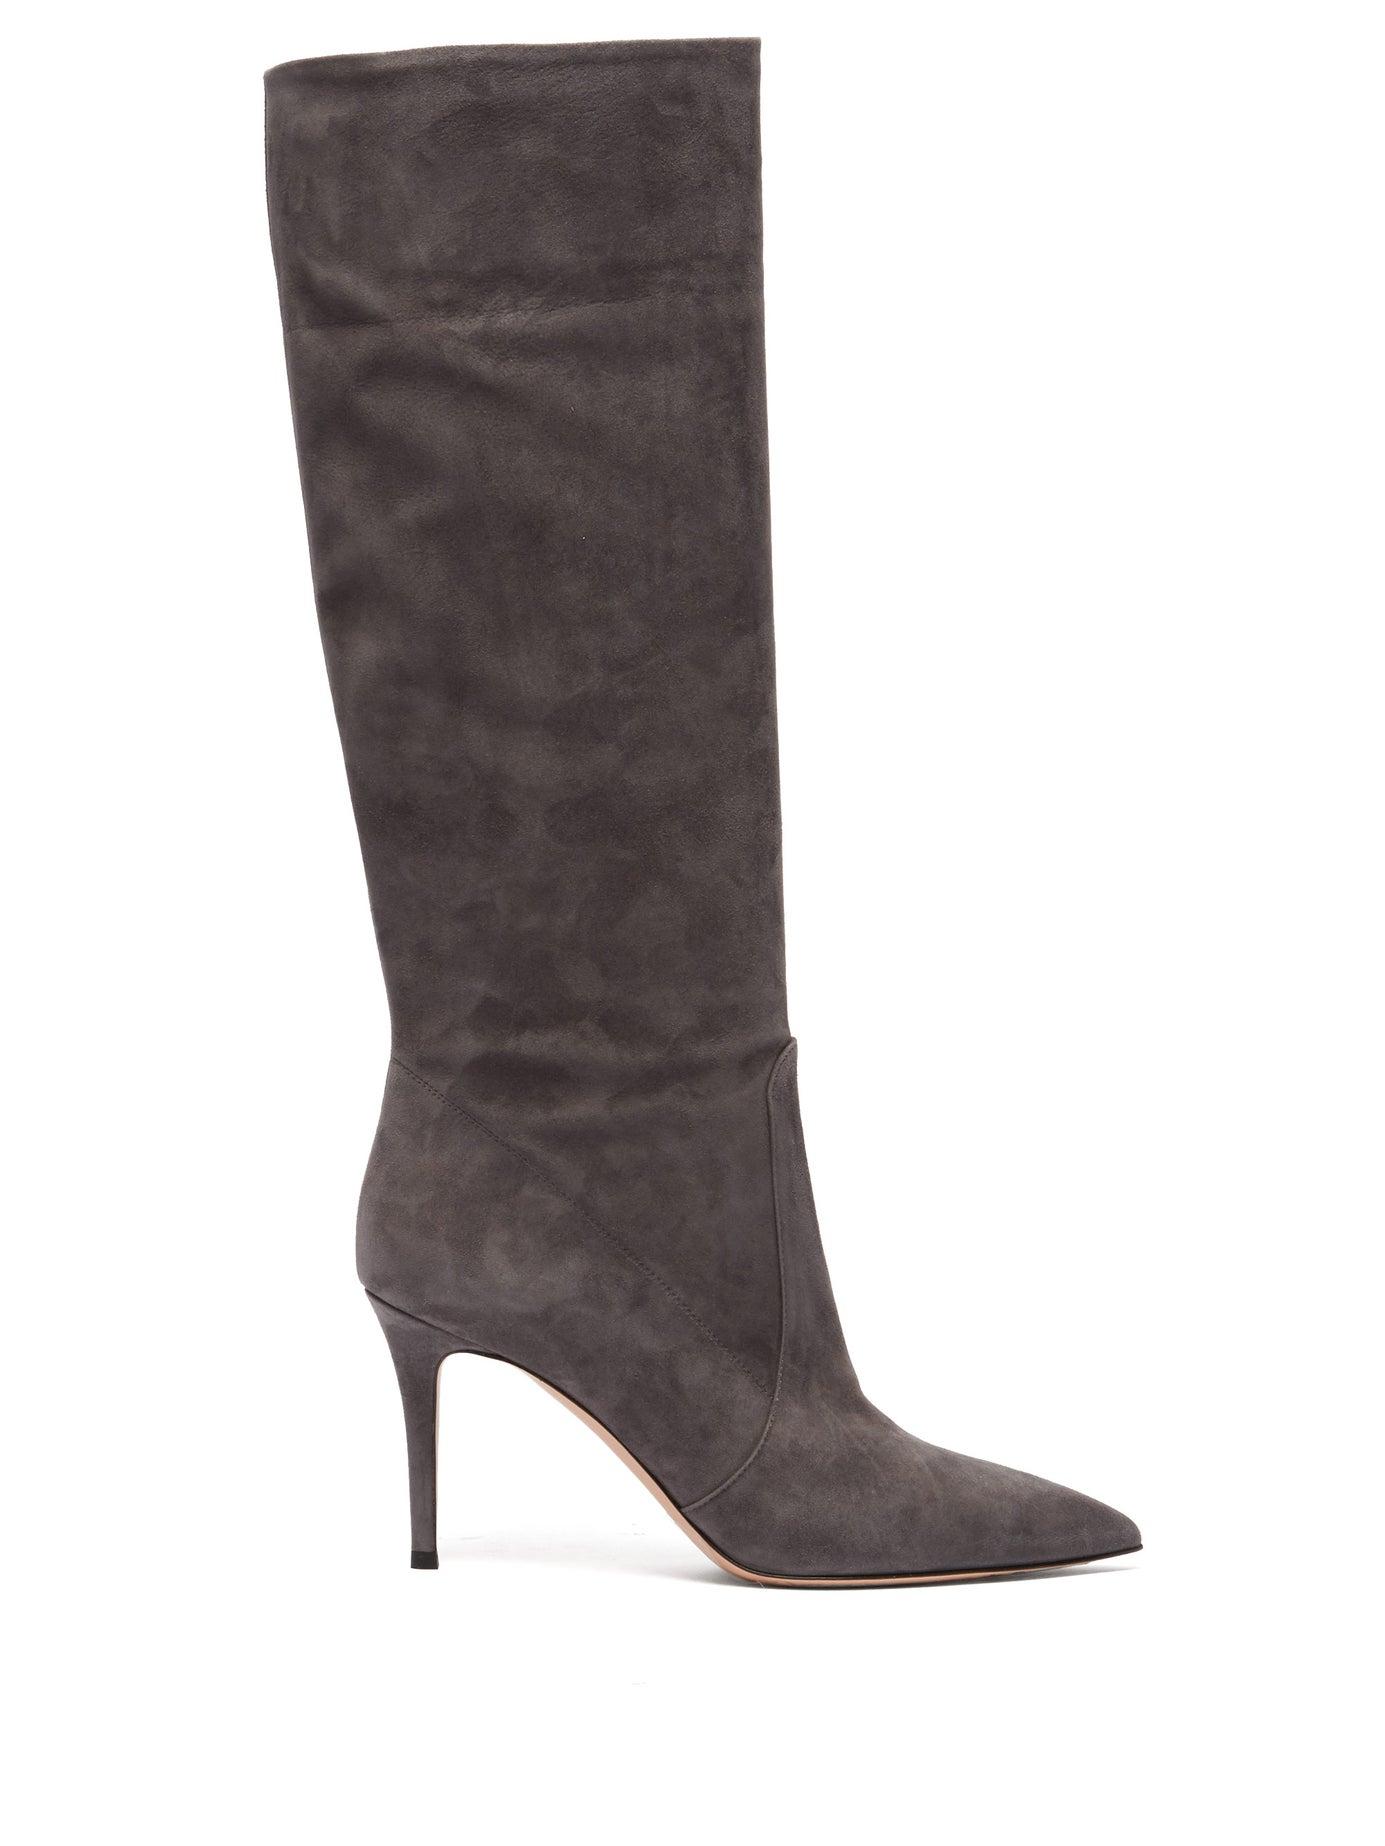 gianvito rossi knee high boots